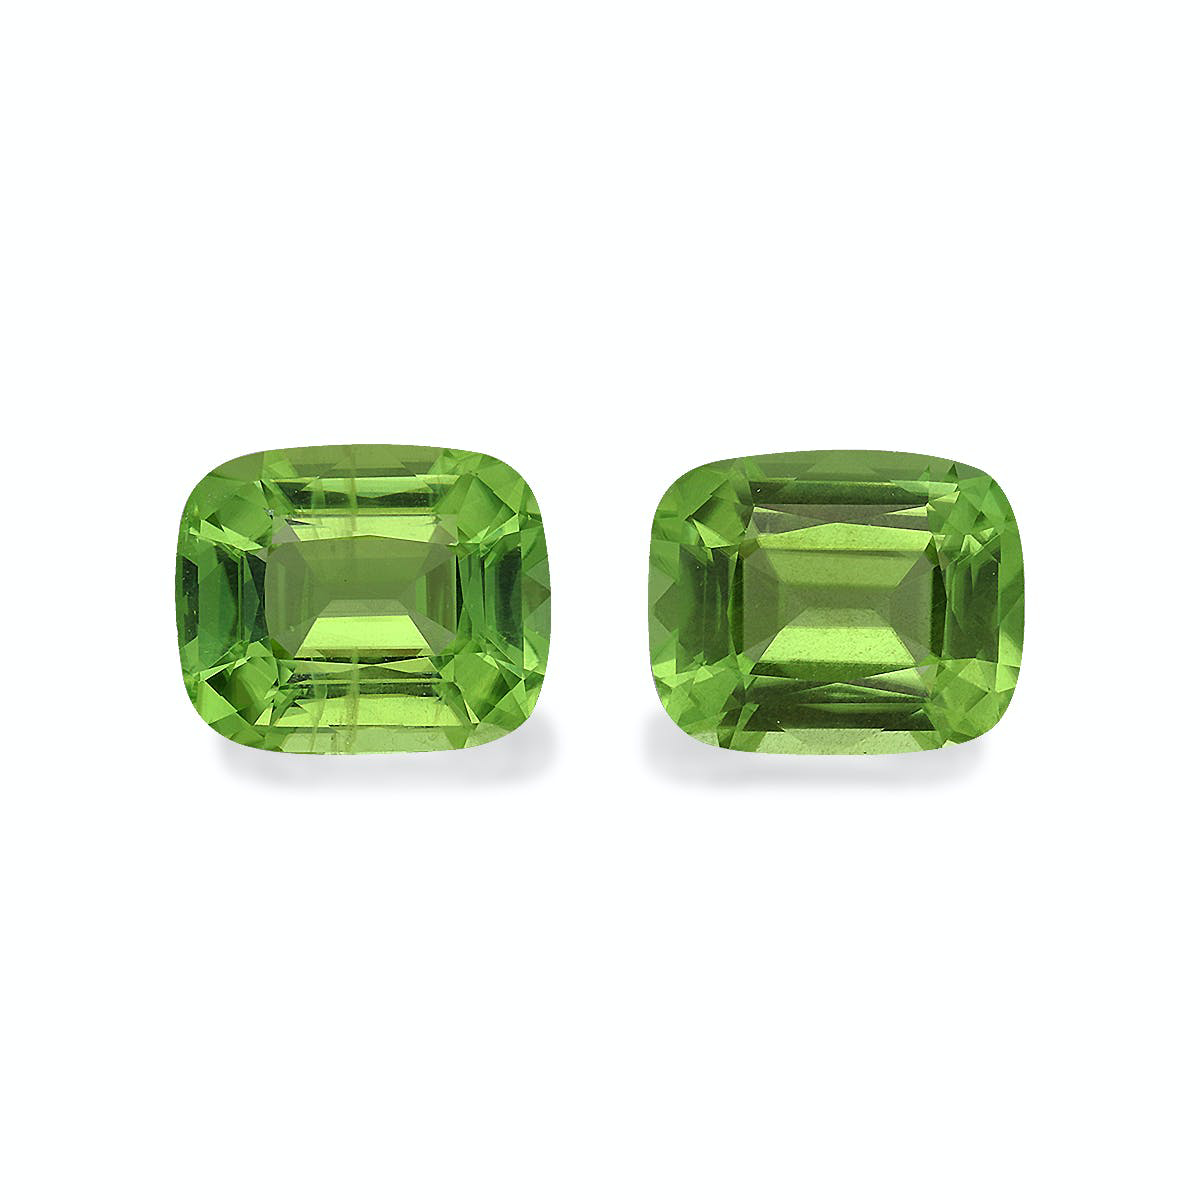 Picture of Green Peridot 6.21ct - 10x8mm Pair (PD0155)